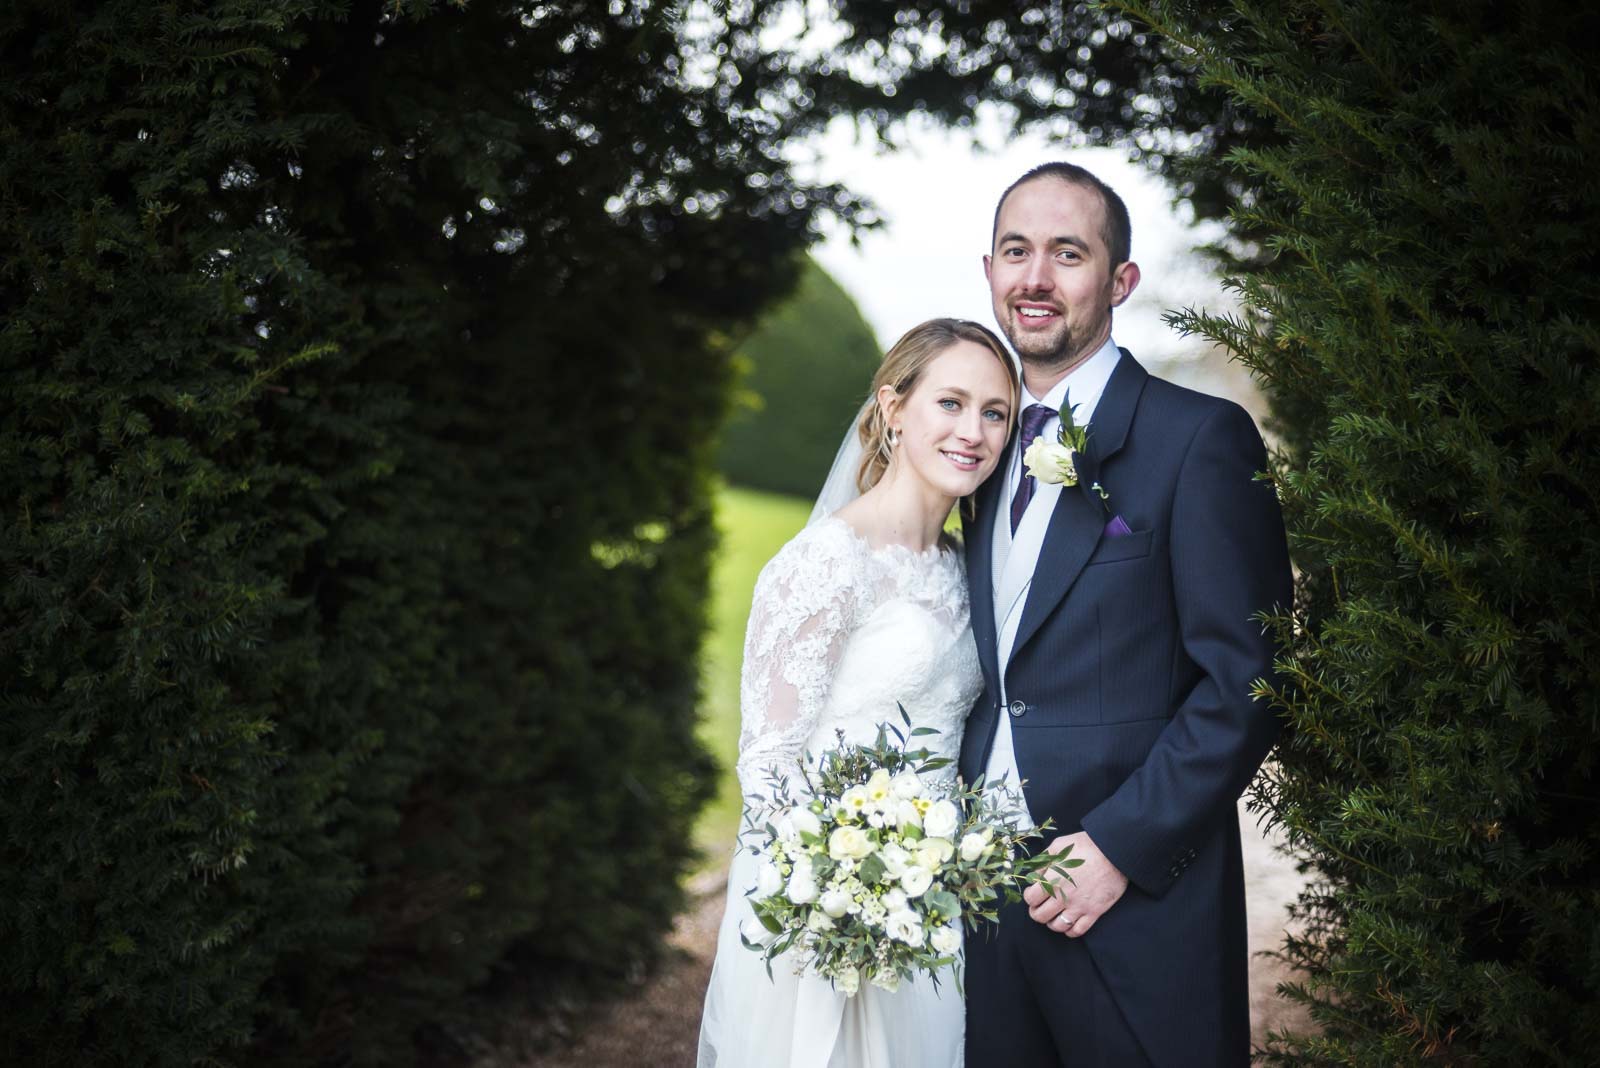 The beautiful couple at Sudeley Castle